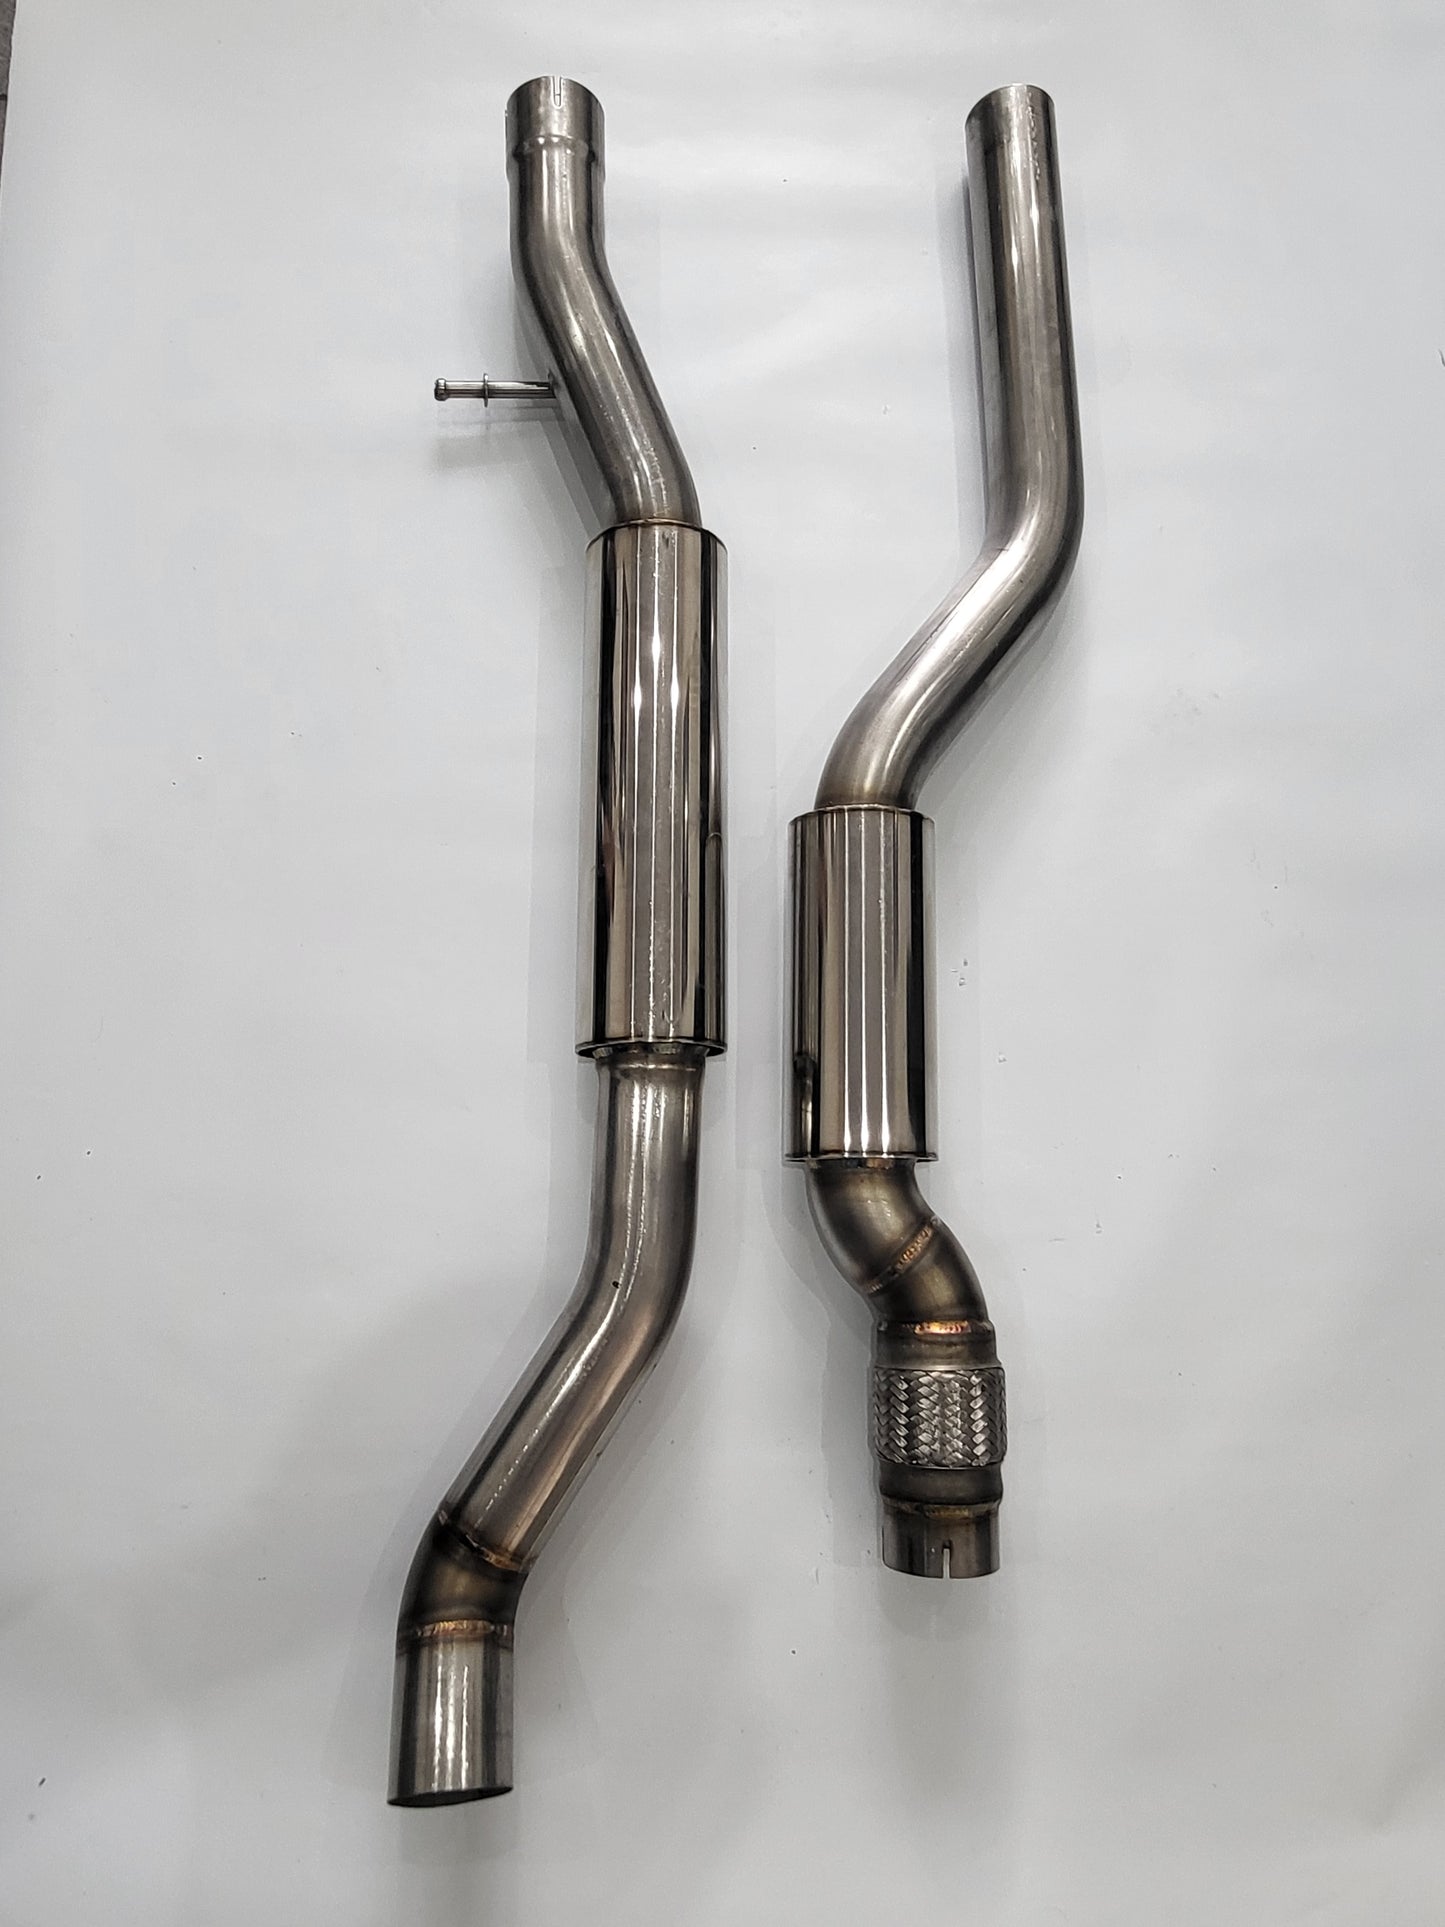 BBR MX-5 NC 70MM 2 3/4" EXHAUST SYSTEM – FOR 350BHP+ BUILDS ONLY